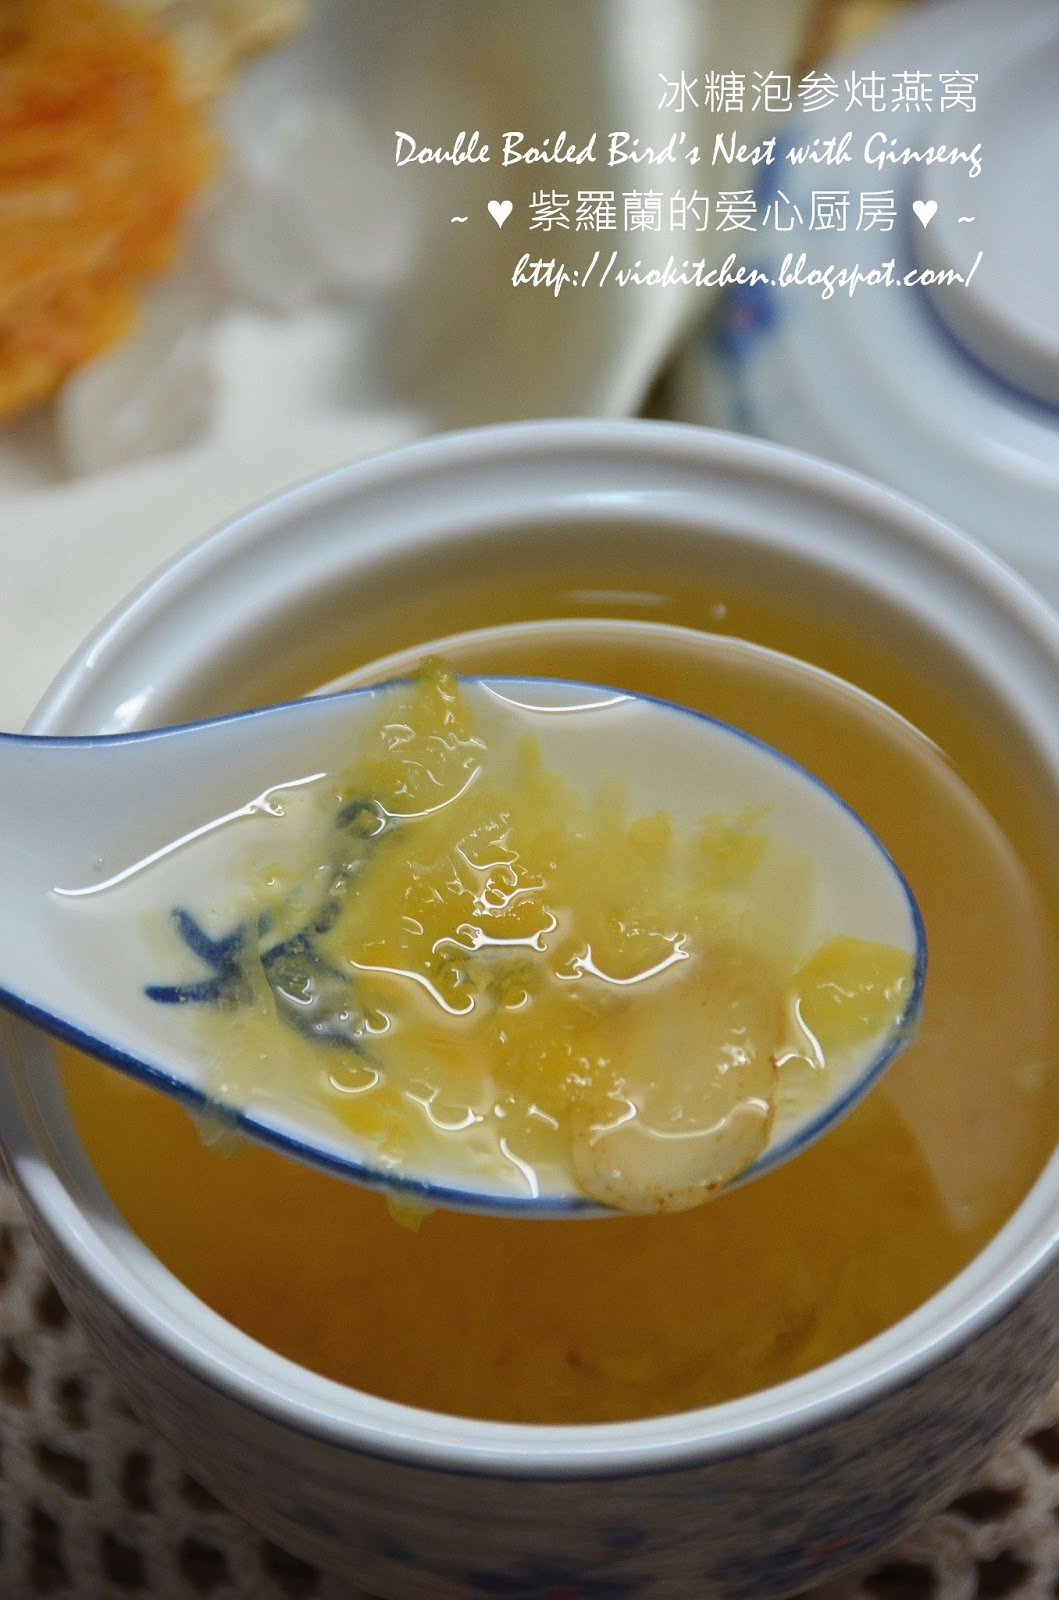 Violet's Kitchen ~♥紫羅蘭的爱心厨房♥~ : 红枣冰糖炖燕窝 Double Boiled Bird's Nest with ...